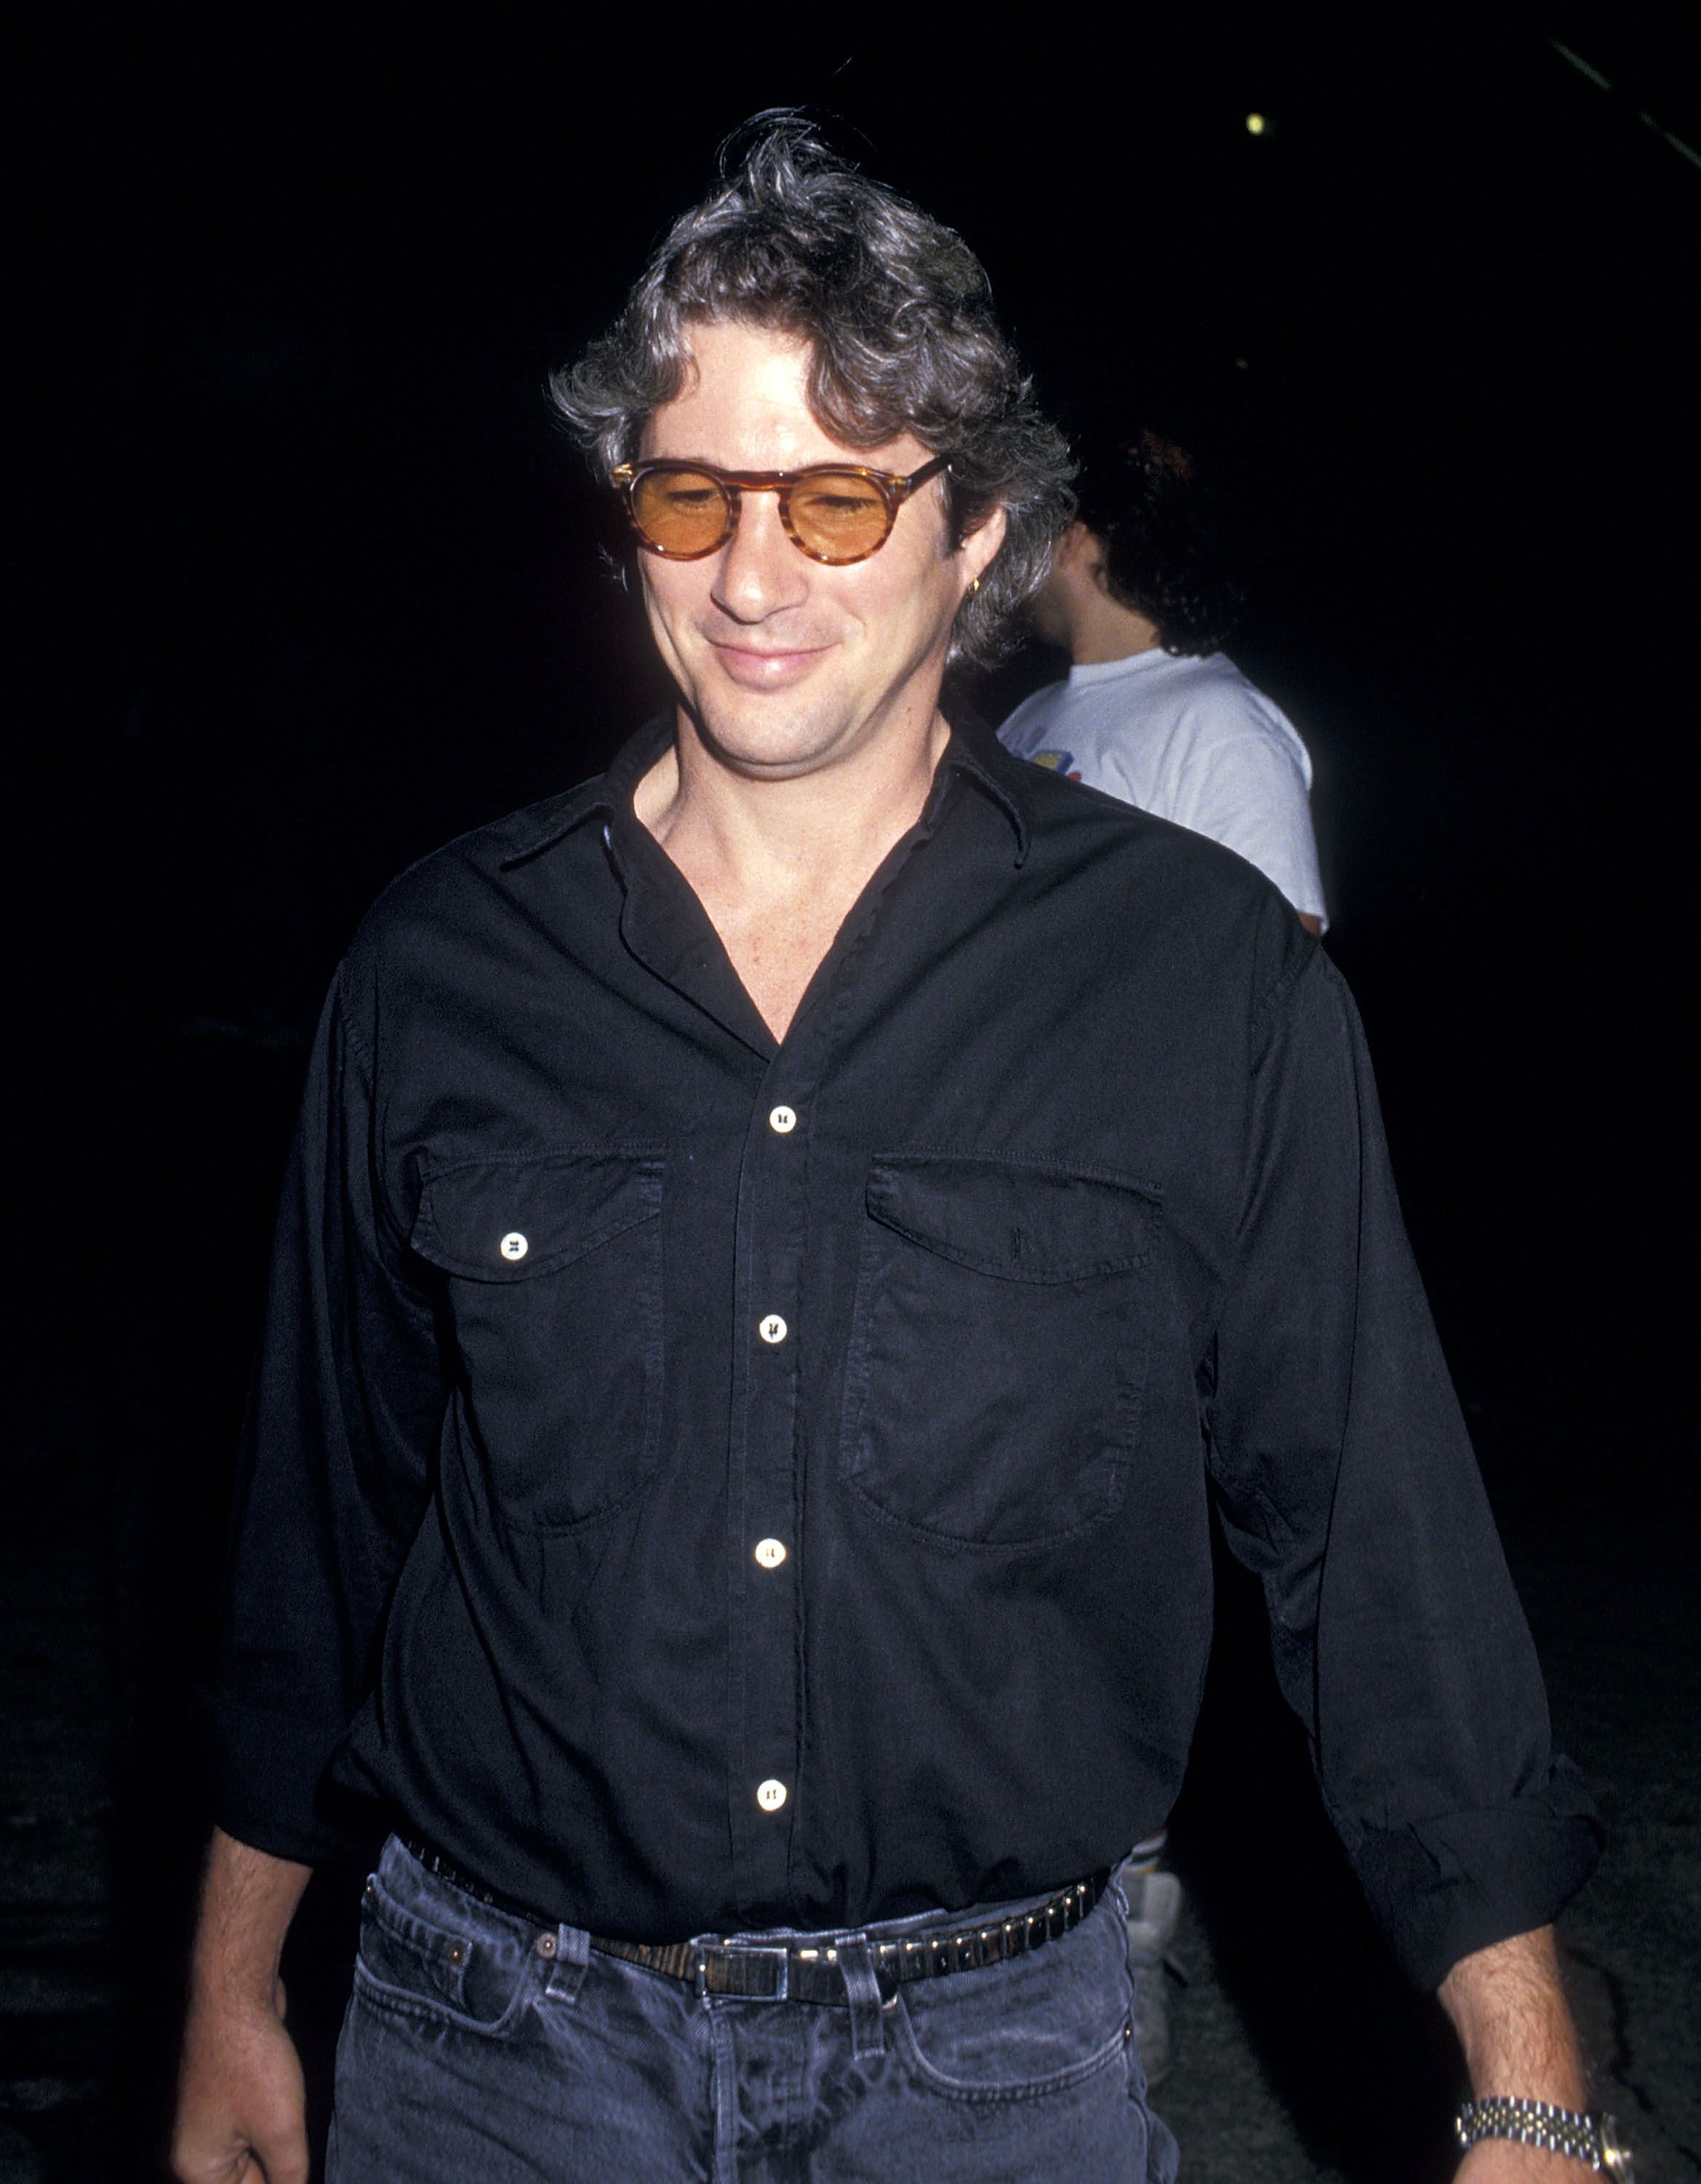 Richard Gere at a Madonna in concert for the Who's That Girl World Tour on July 13, 1987. | Photo: Getty Images